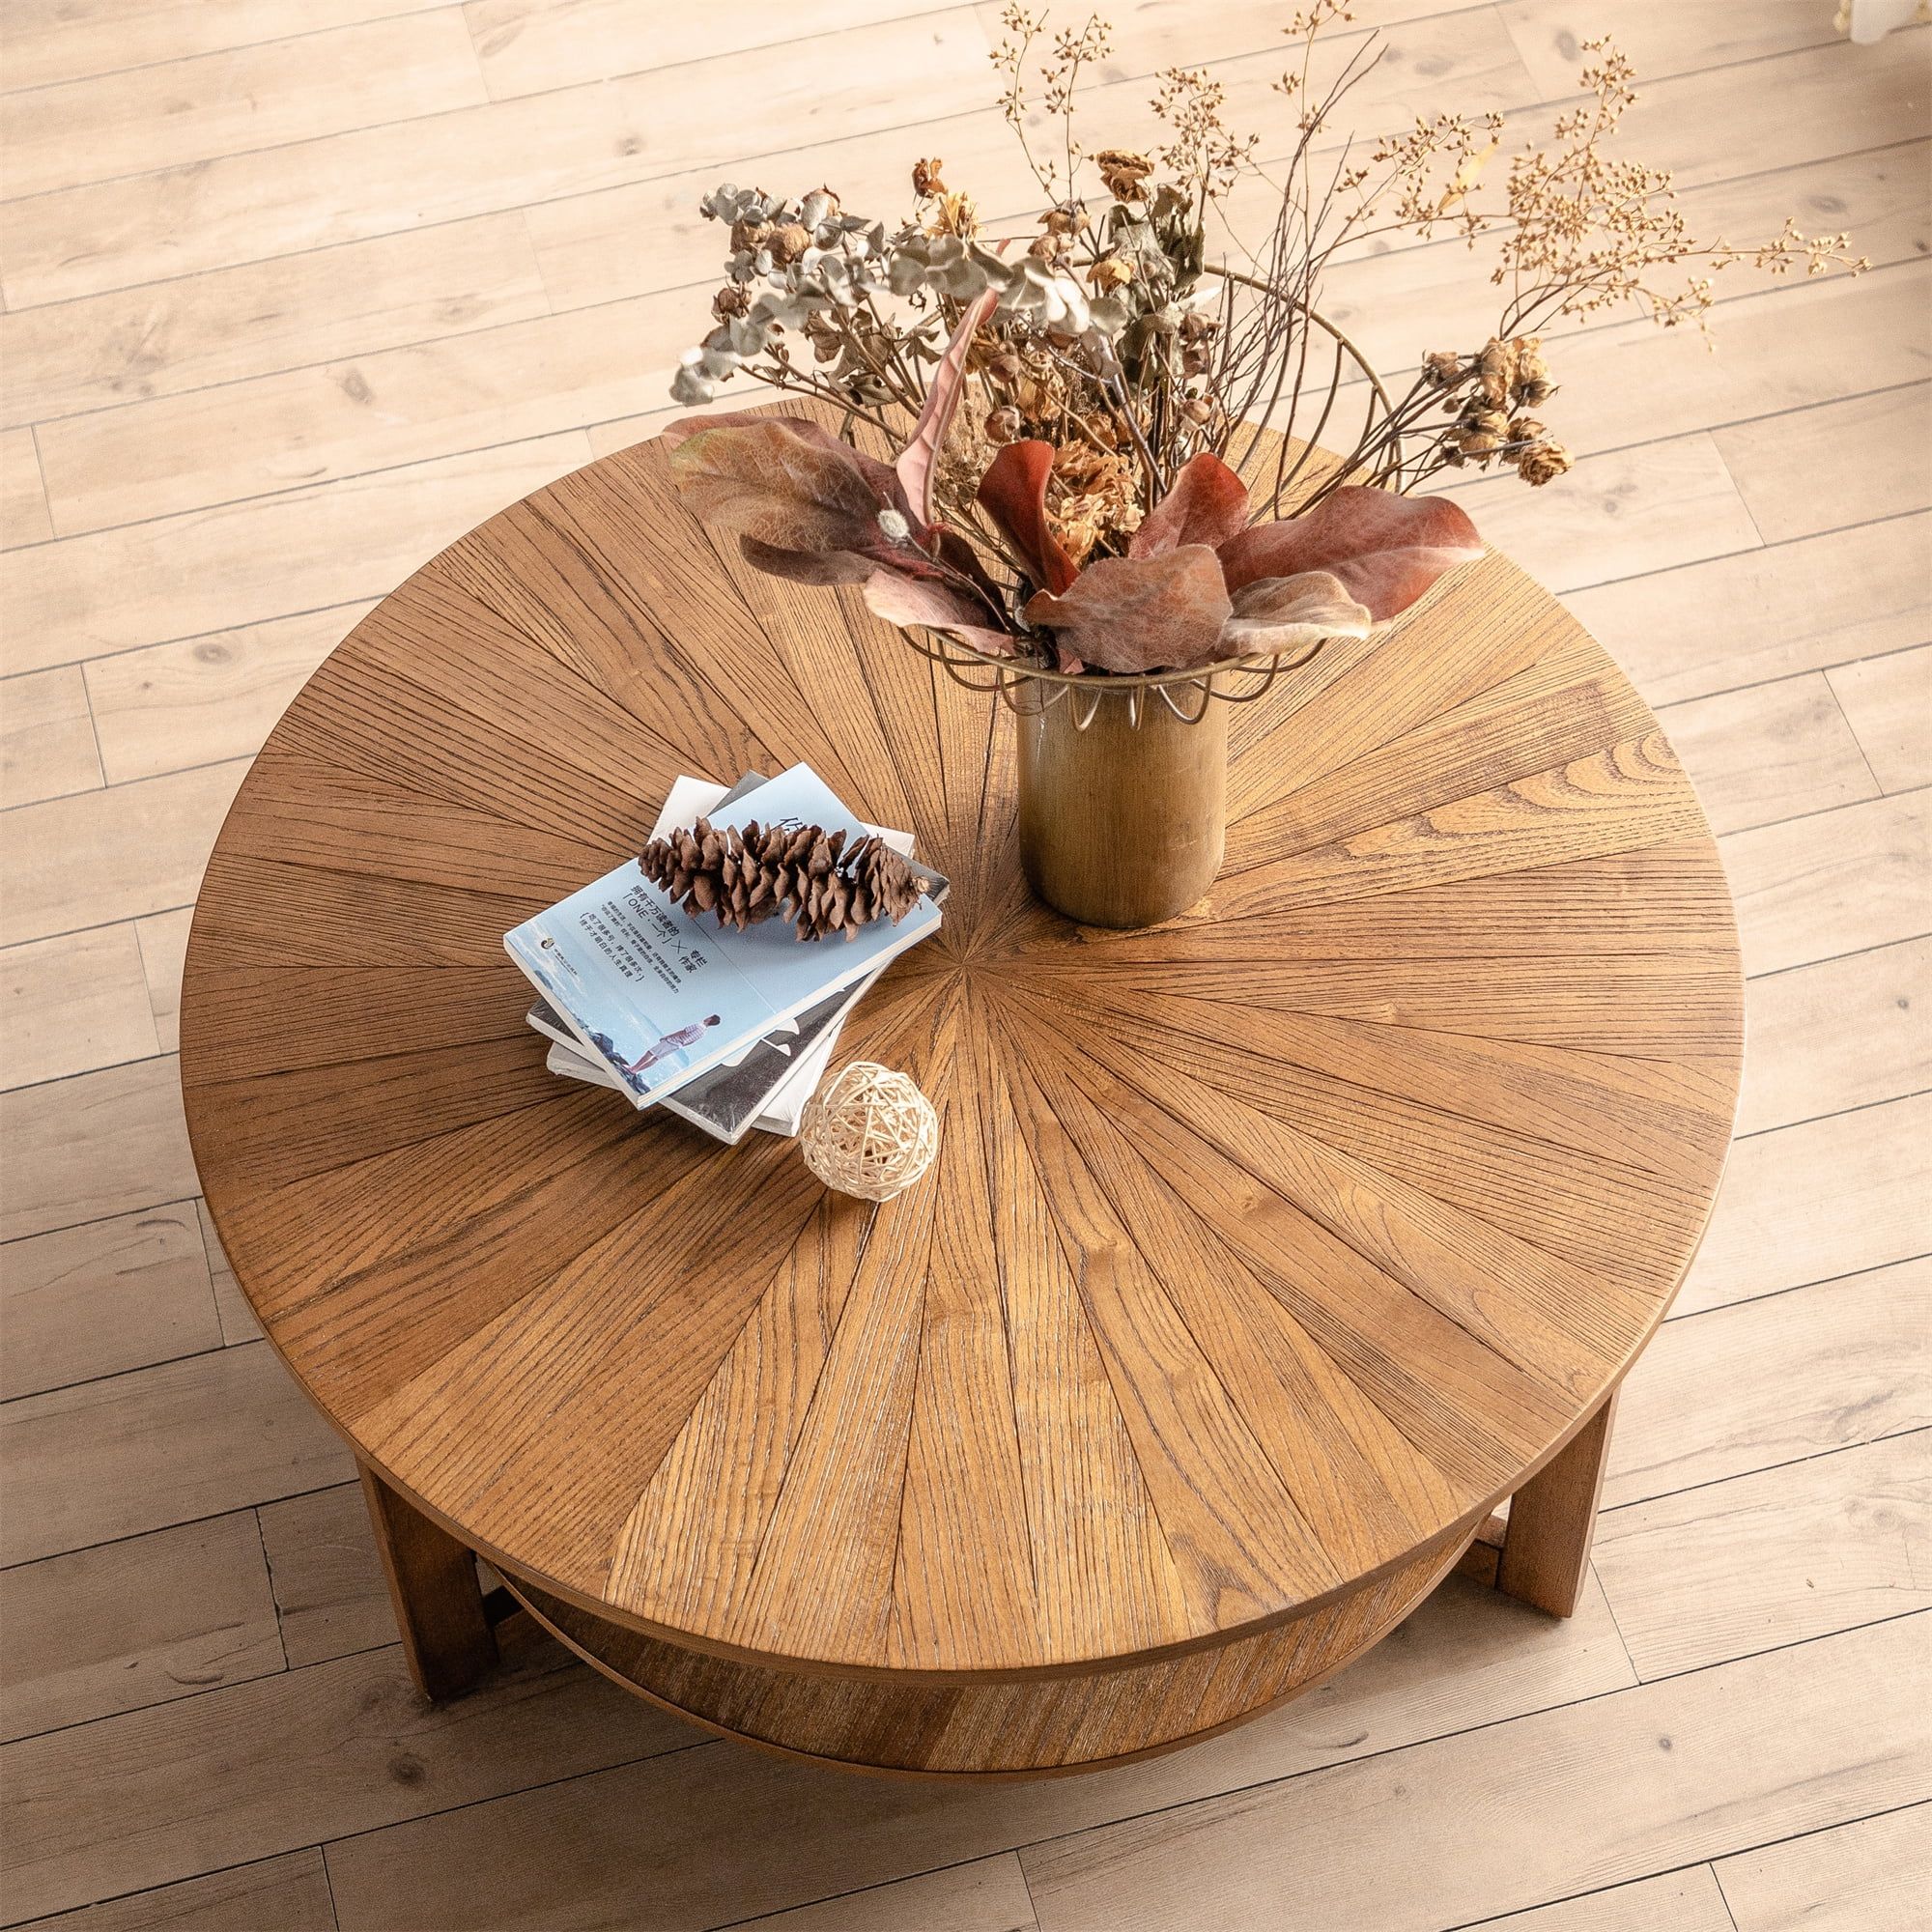 Gexpusm Round Coffee Table, Rustic Wood Coffee Table With Storage Shelf For  Living Room Bedroom, Brown Circle Coffee Table – Walmart For Rustic Wood Coffee Tables (Photo 6 of 15)